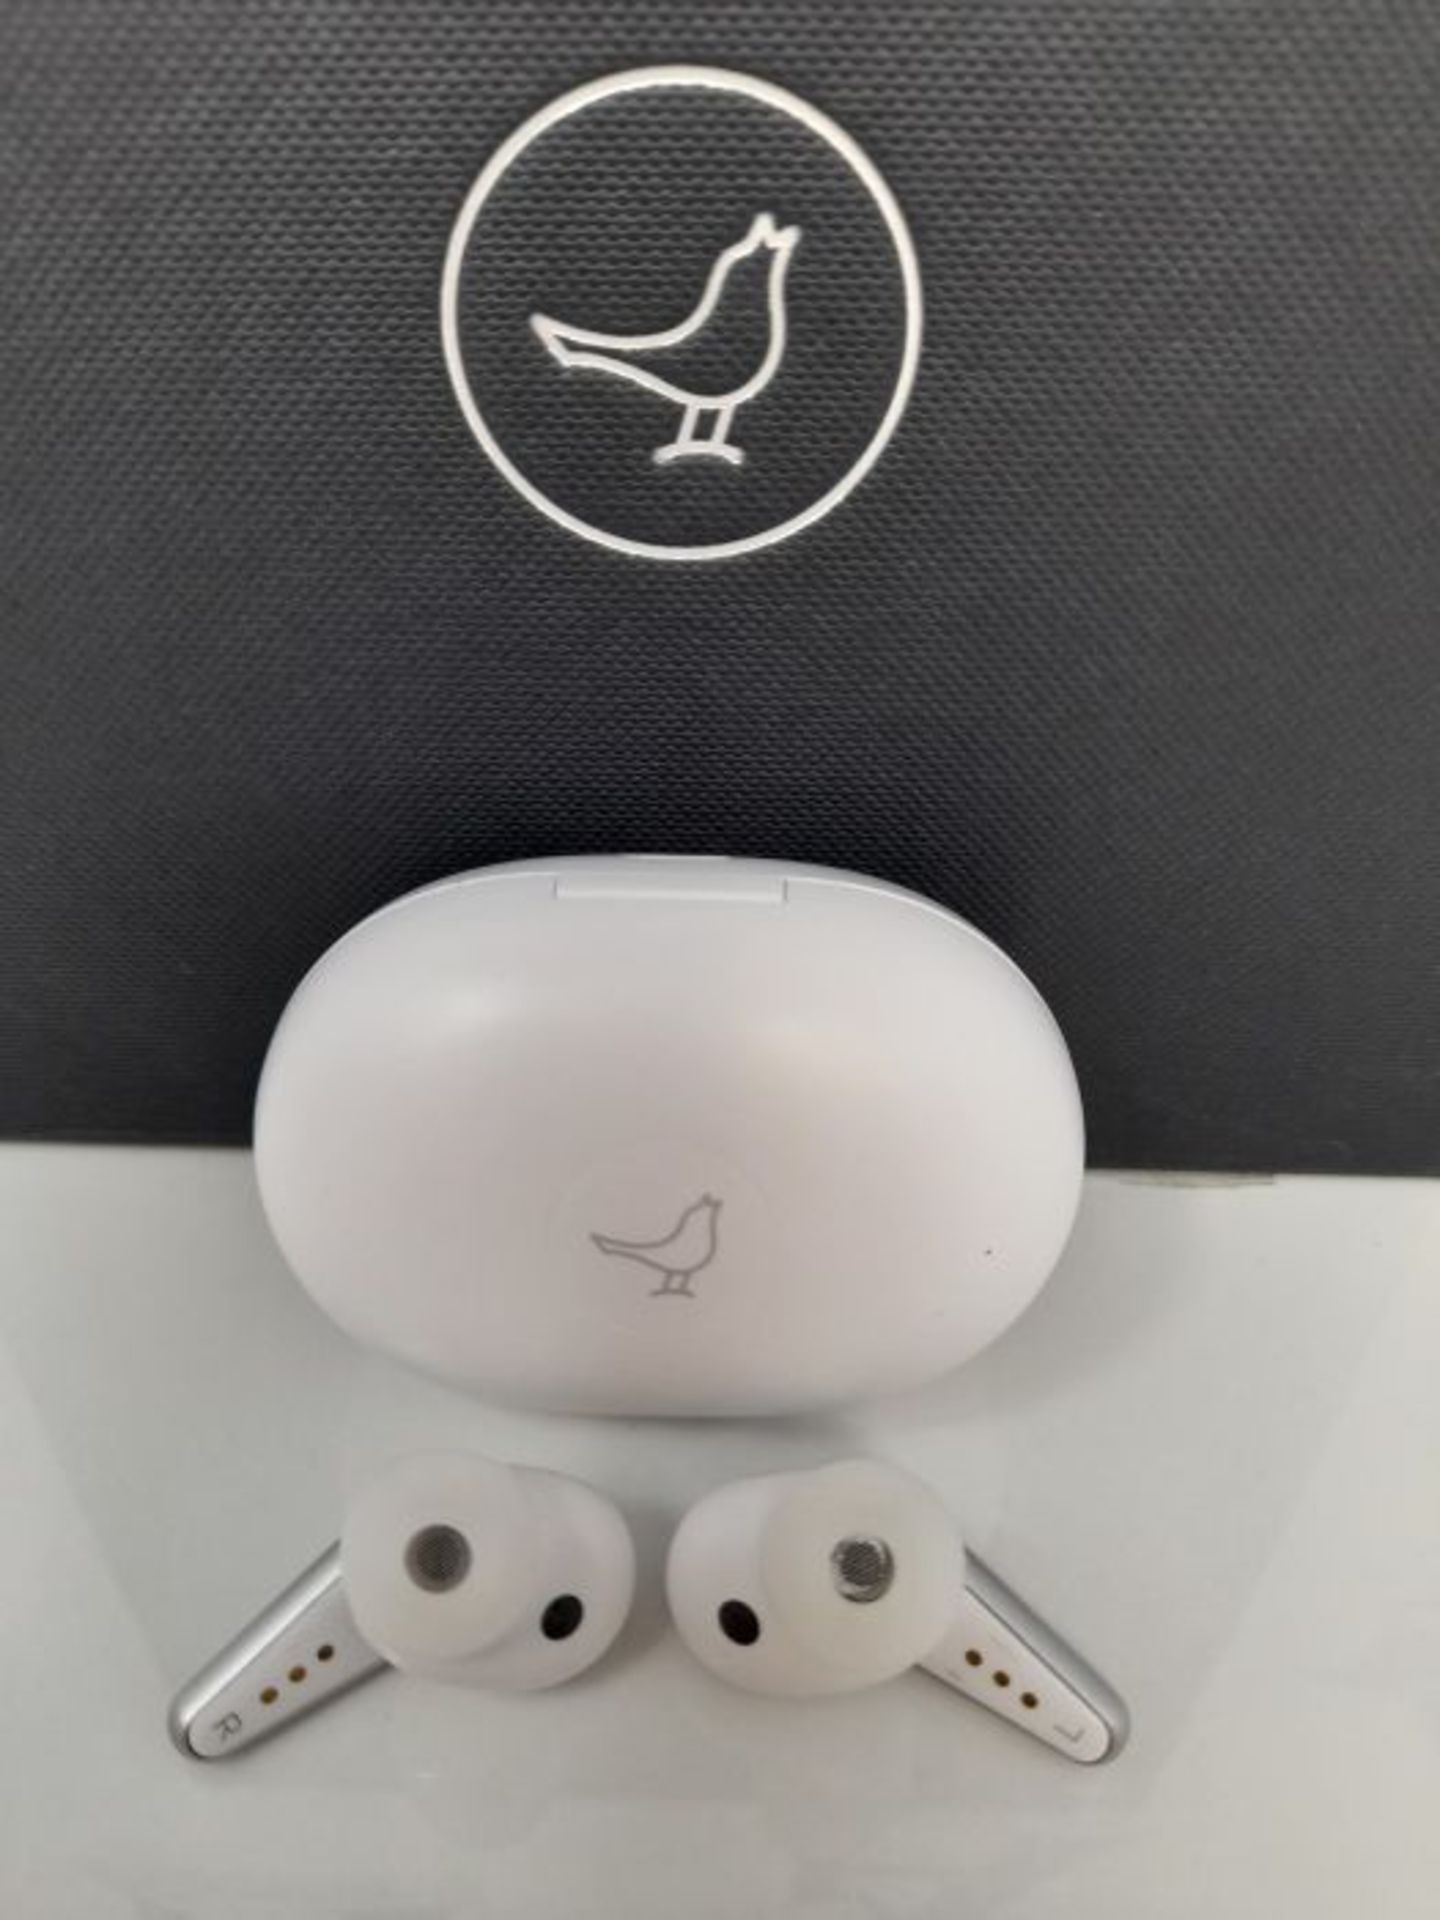 RRP £170.00 Libratone LI0080000EU6005 TRACK Air+ true wireless earbuds smart noise cancelling (24h - Image 3 of 3